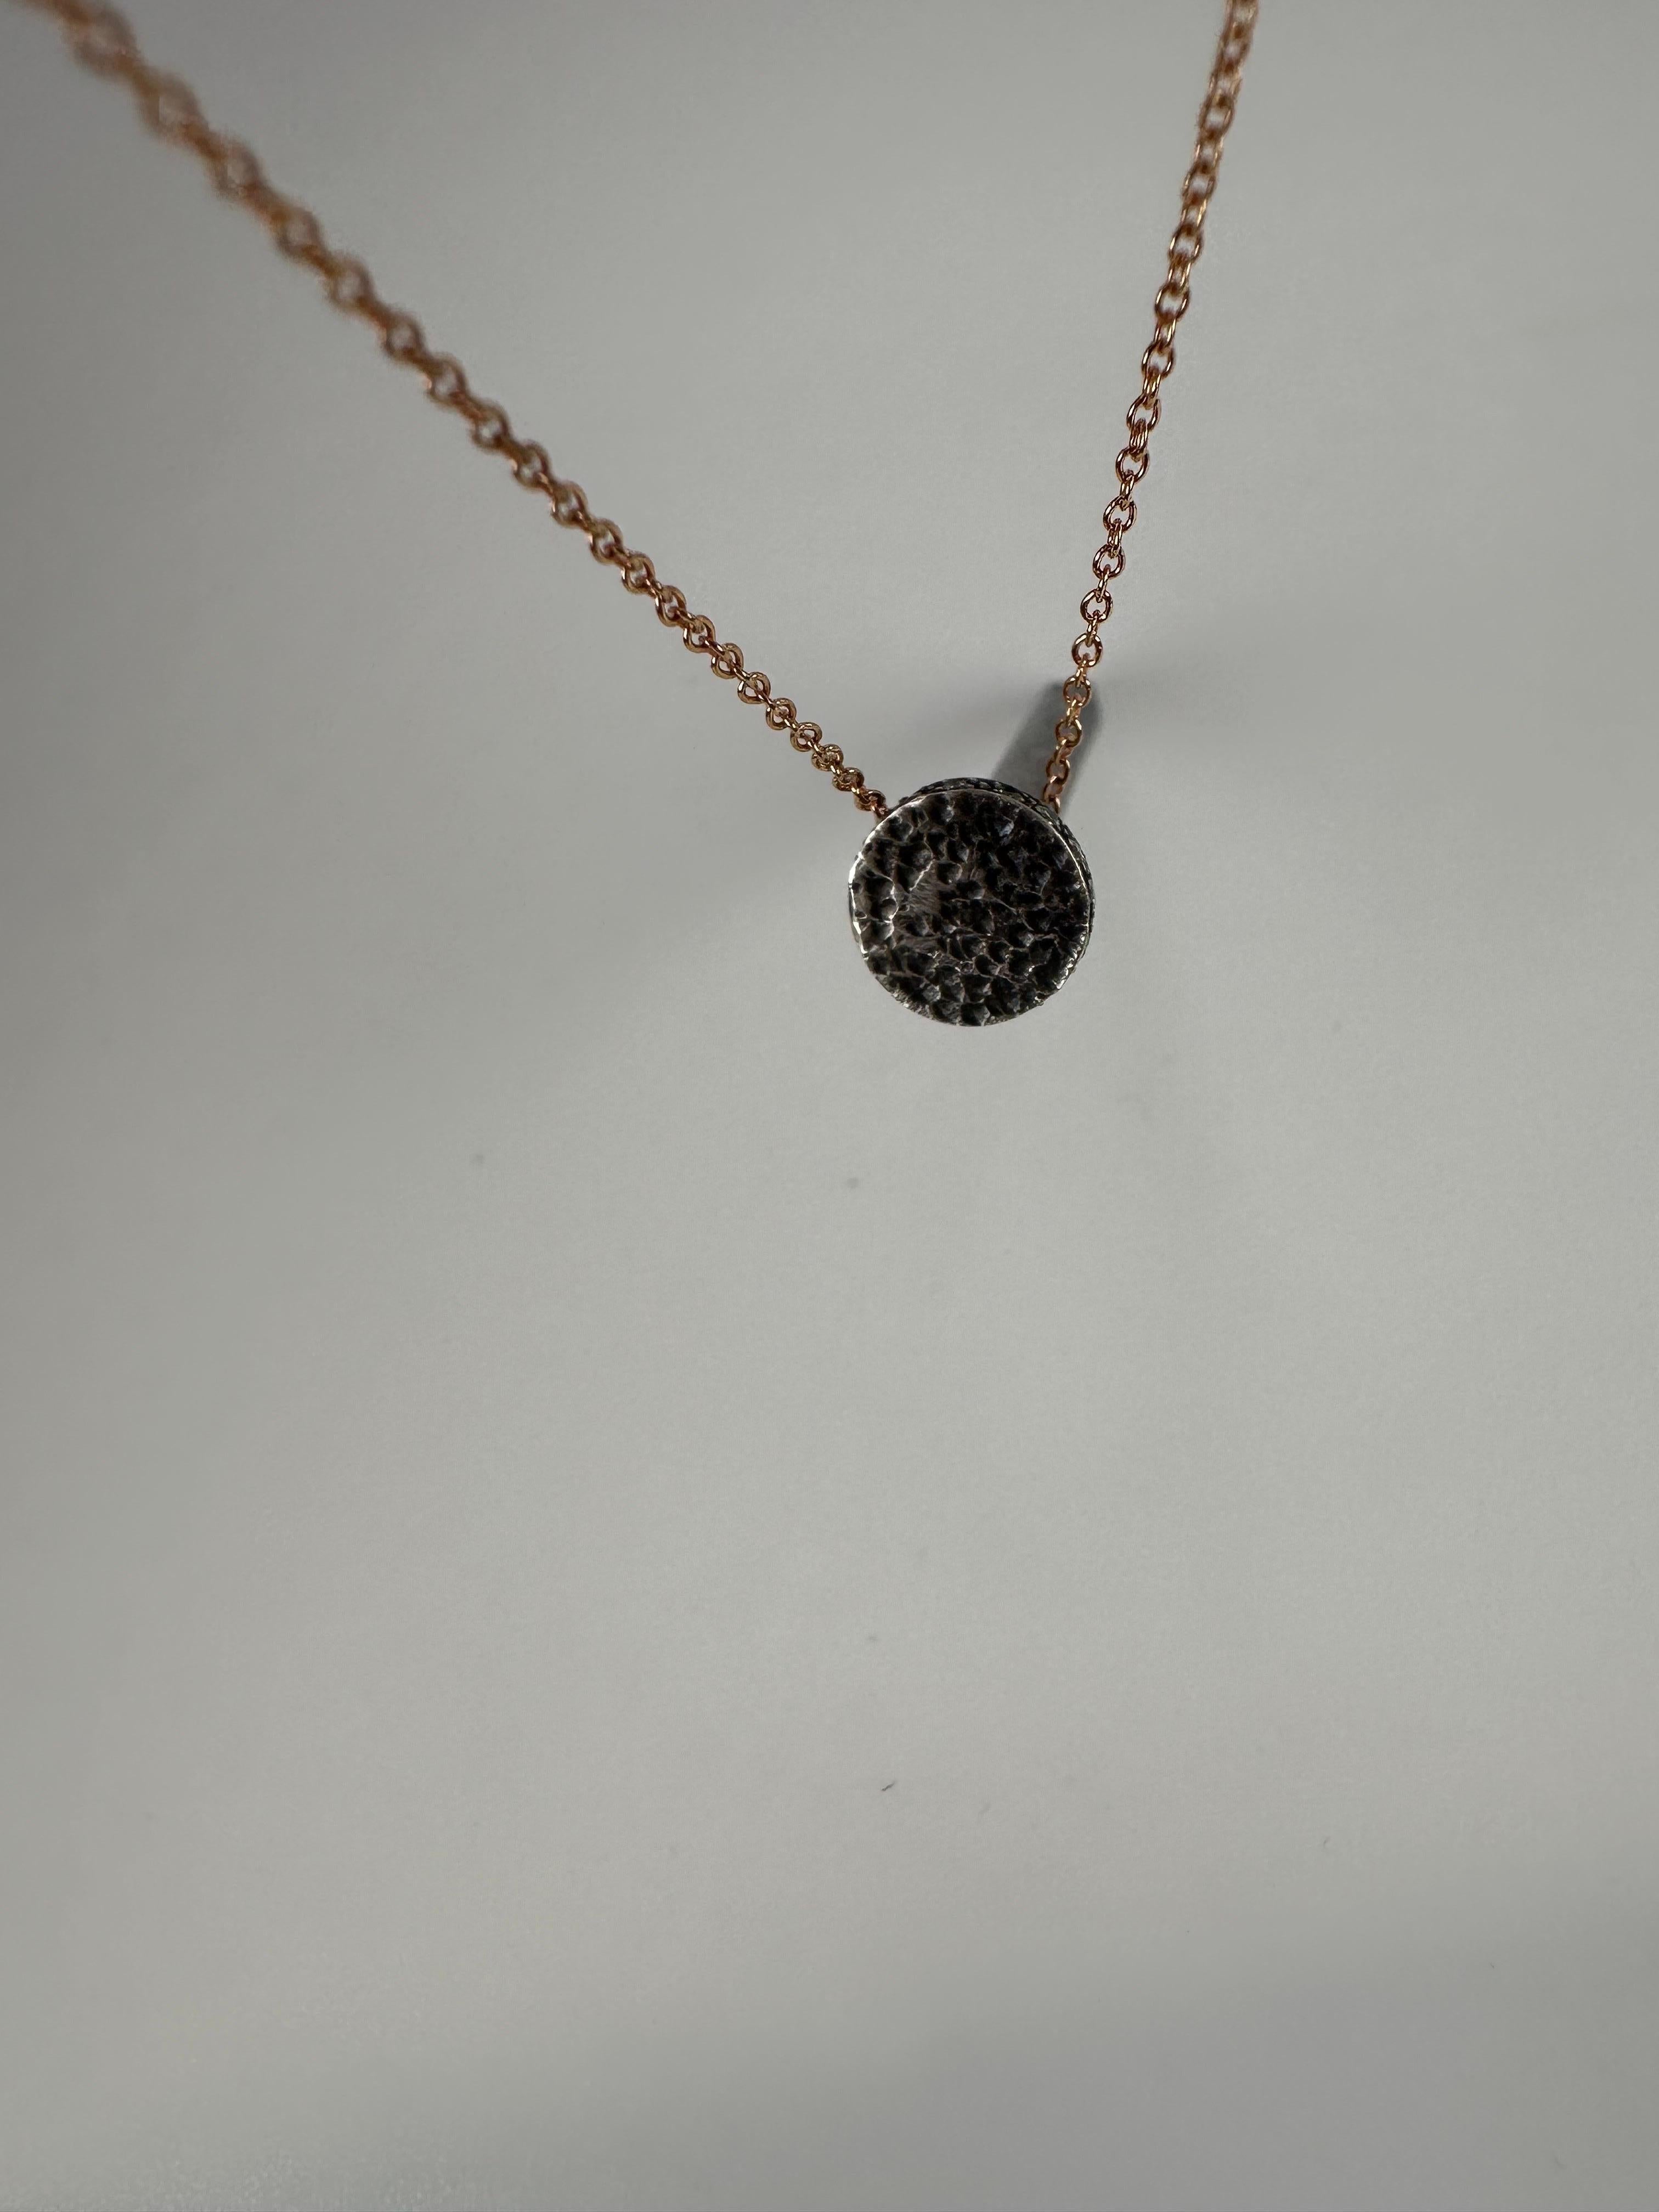 Nail Pendant Necklace 18kt Gold Extraordinary Unisex Necklace Modern Minimalism In New Condition For Sale In Jupiter, FL